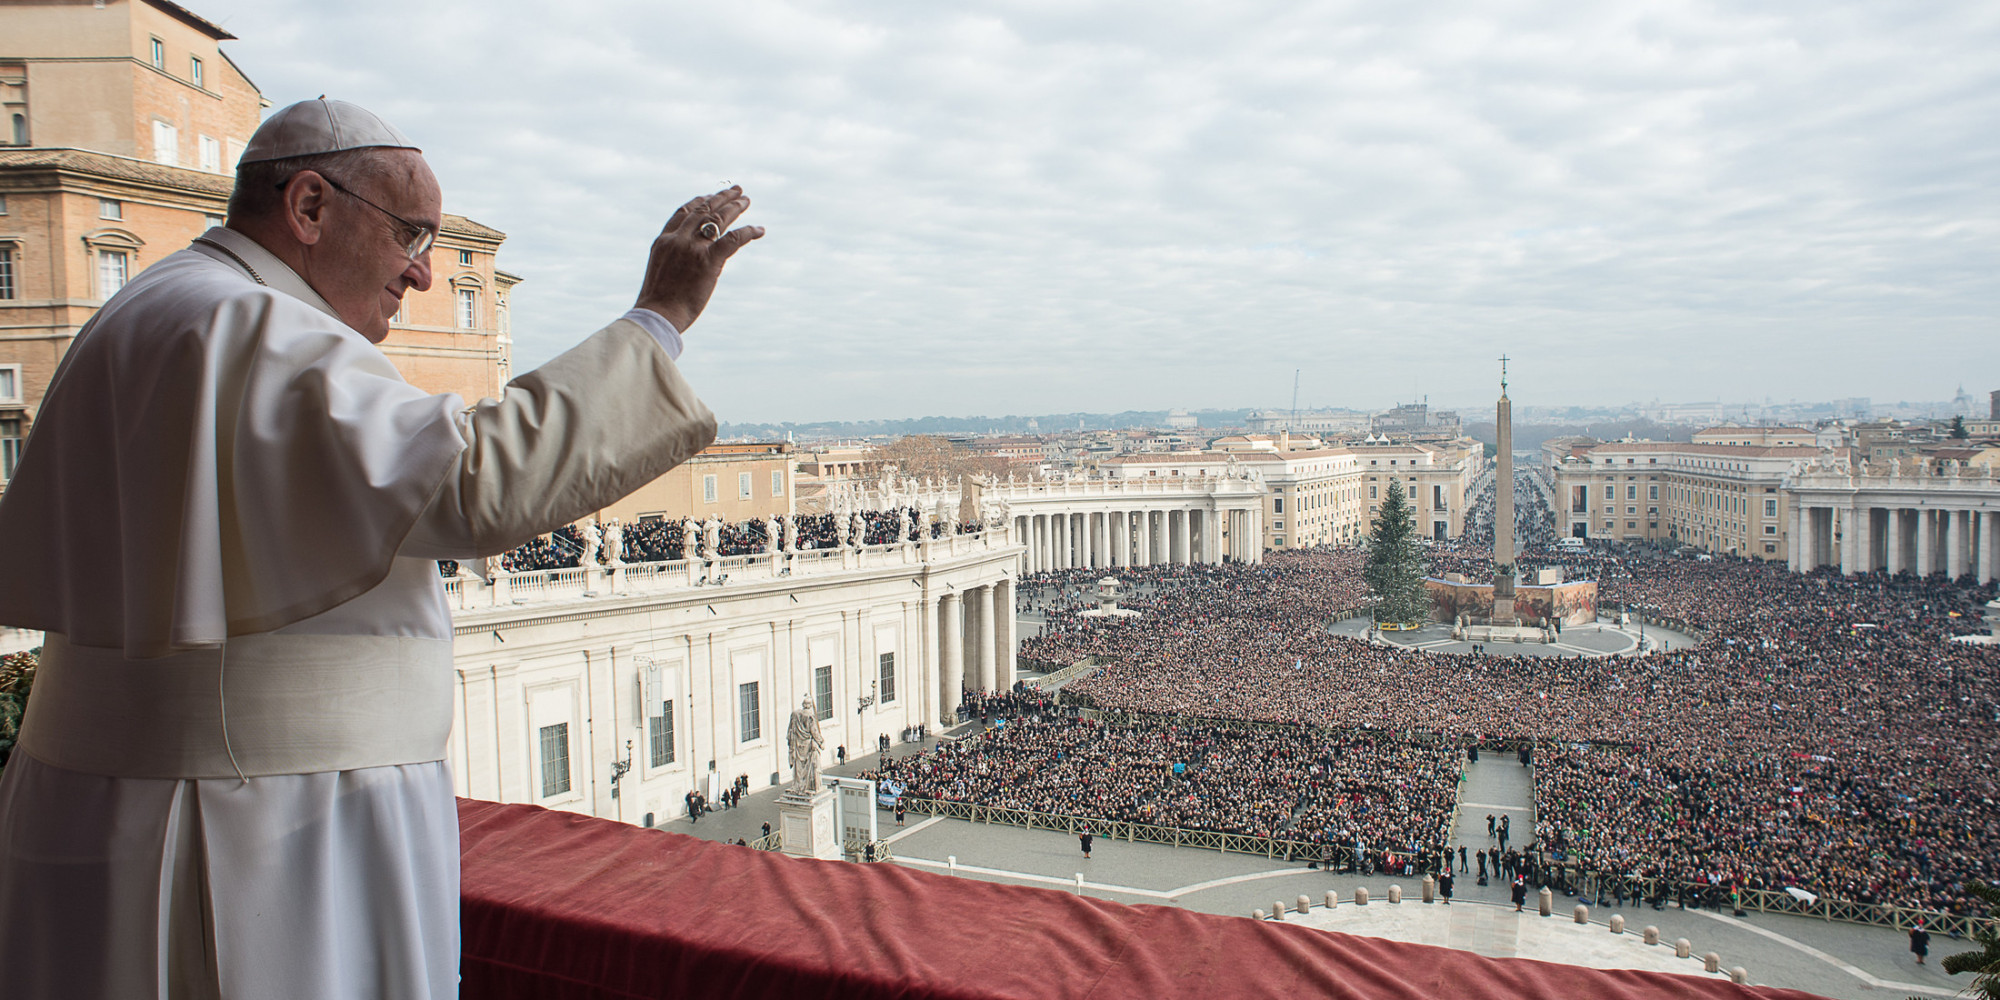 Nearly 6 Million People Traveled To The Vatican To See Pope Francis In